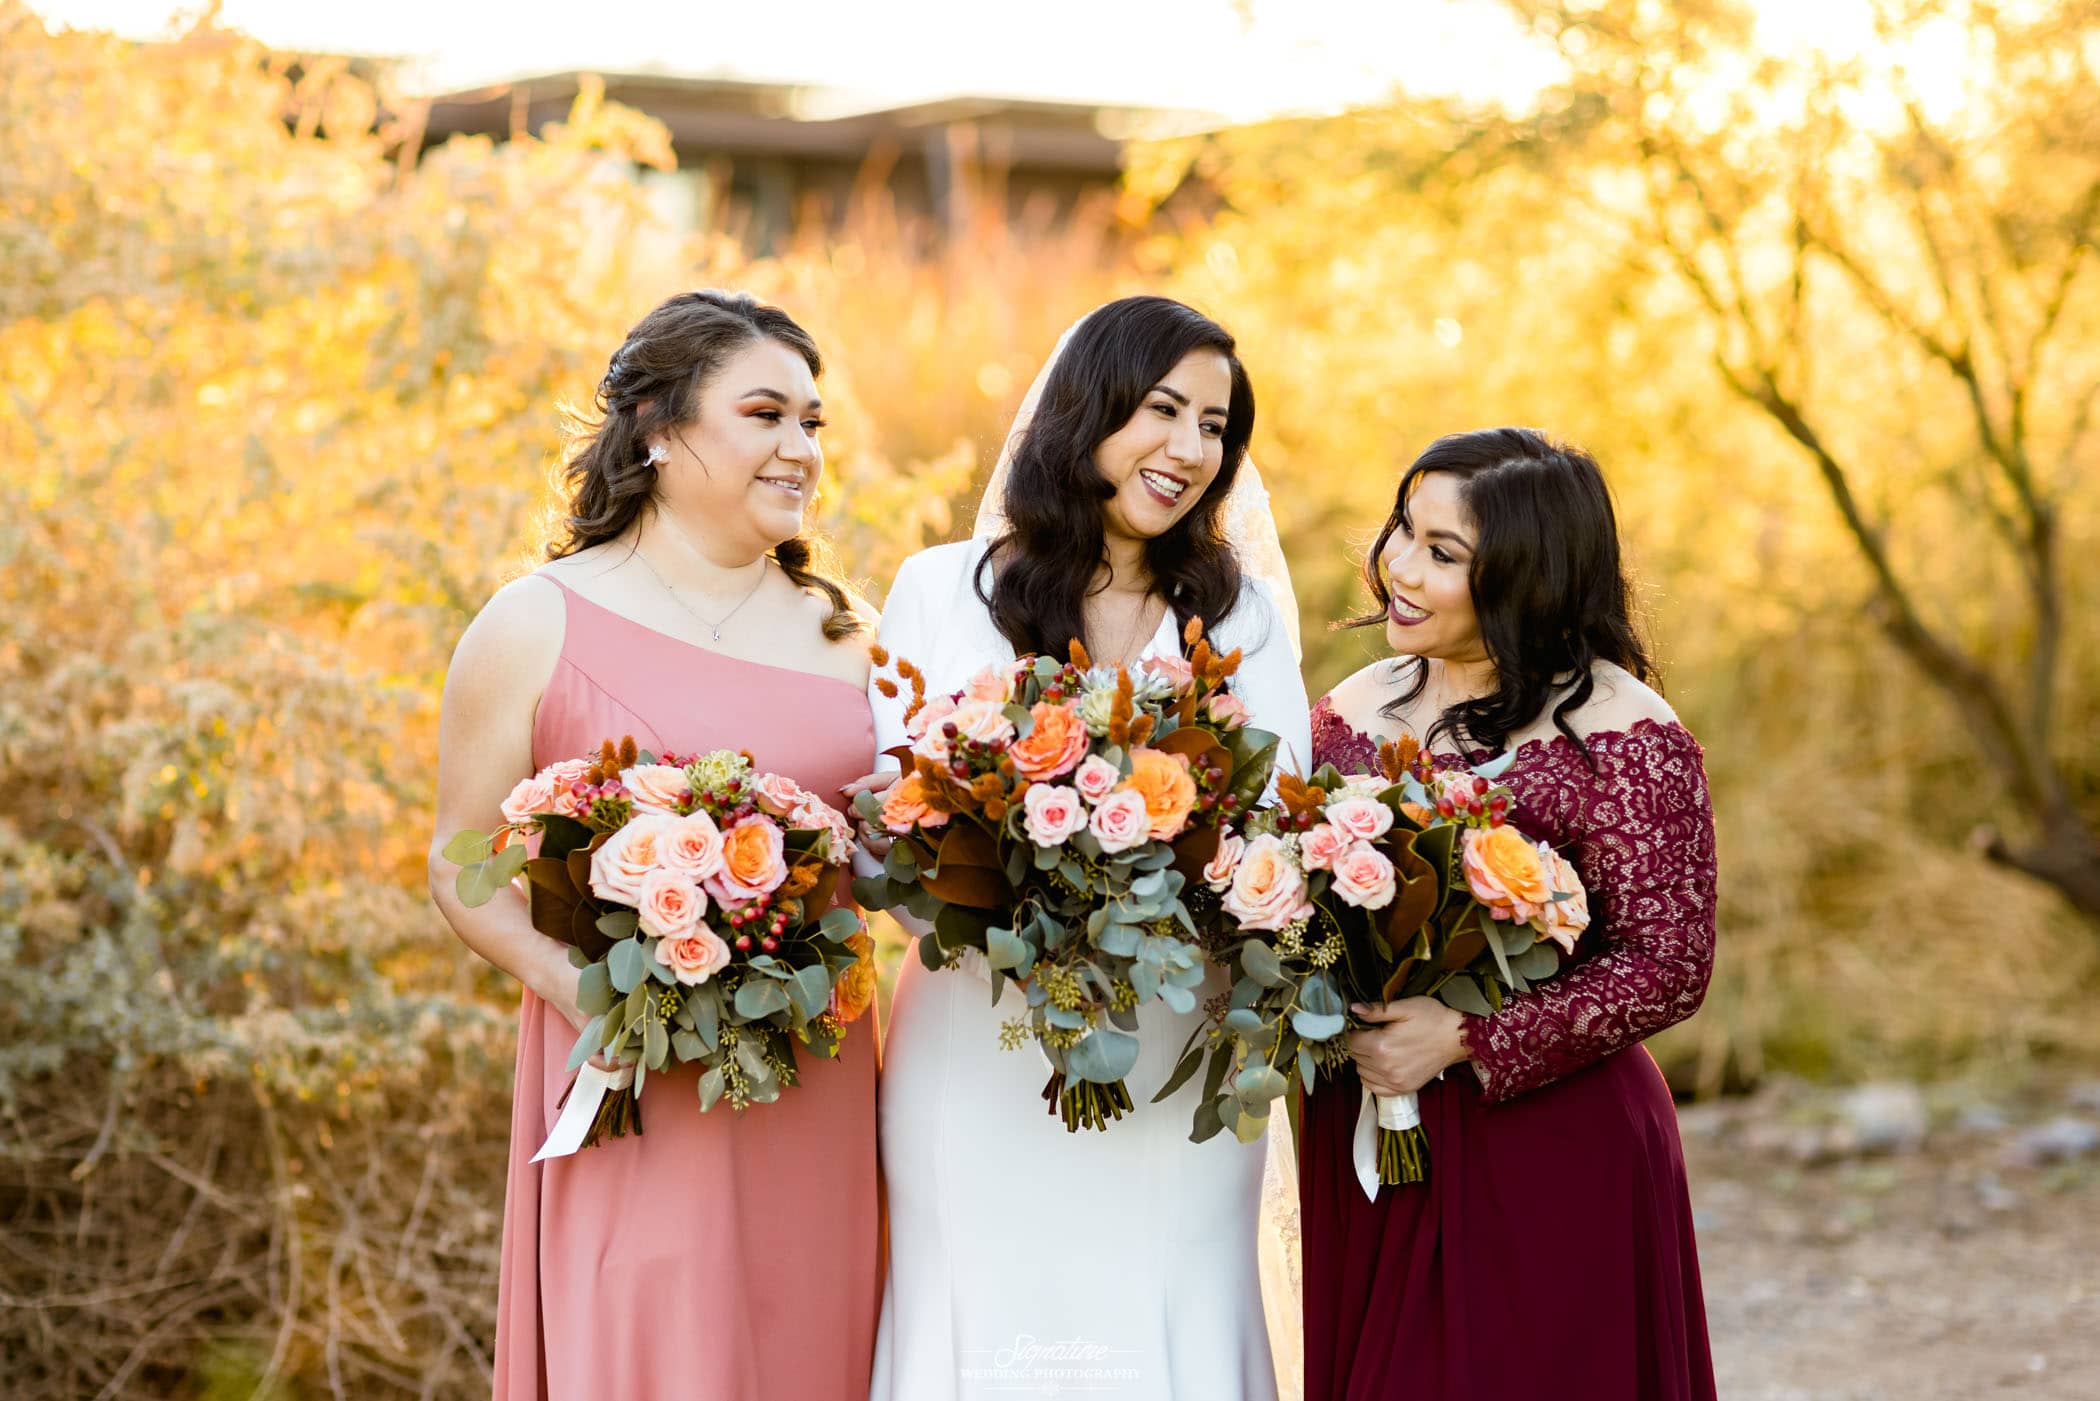 Bride and bridesmaids smiling holding bouquets